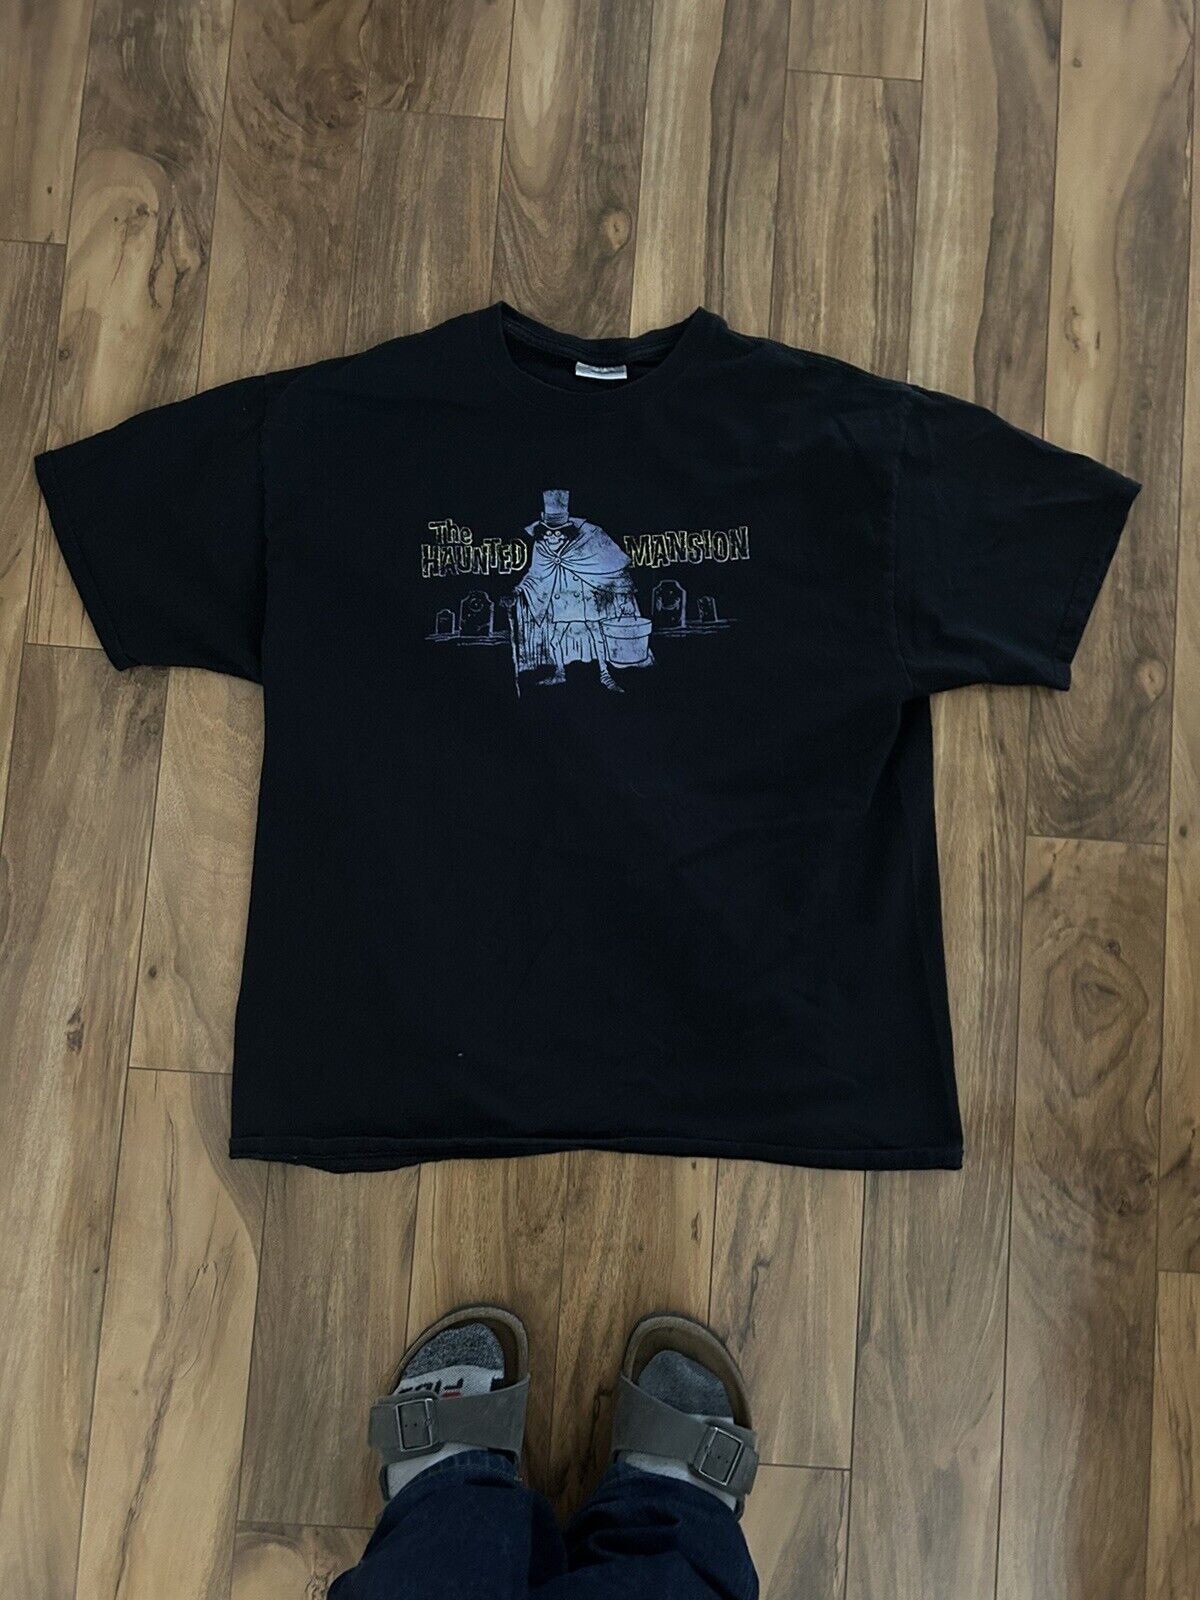 disney haunted mansion shirt Size 2xl Perfect Condition